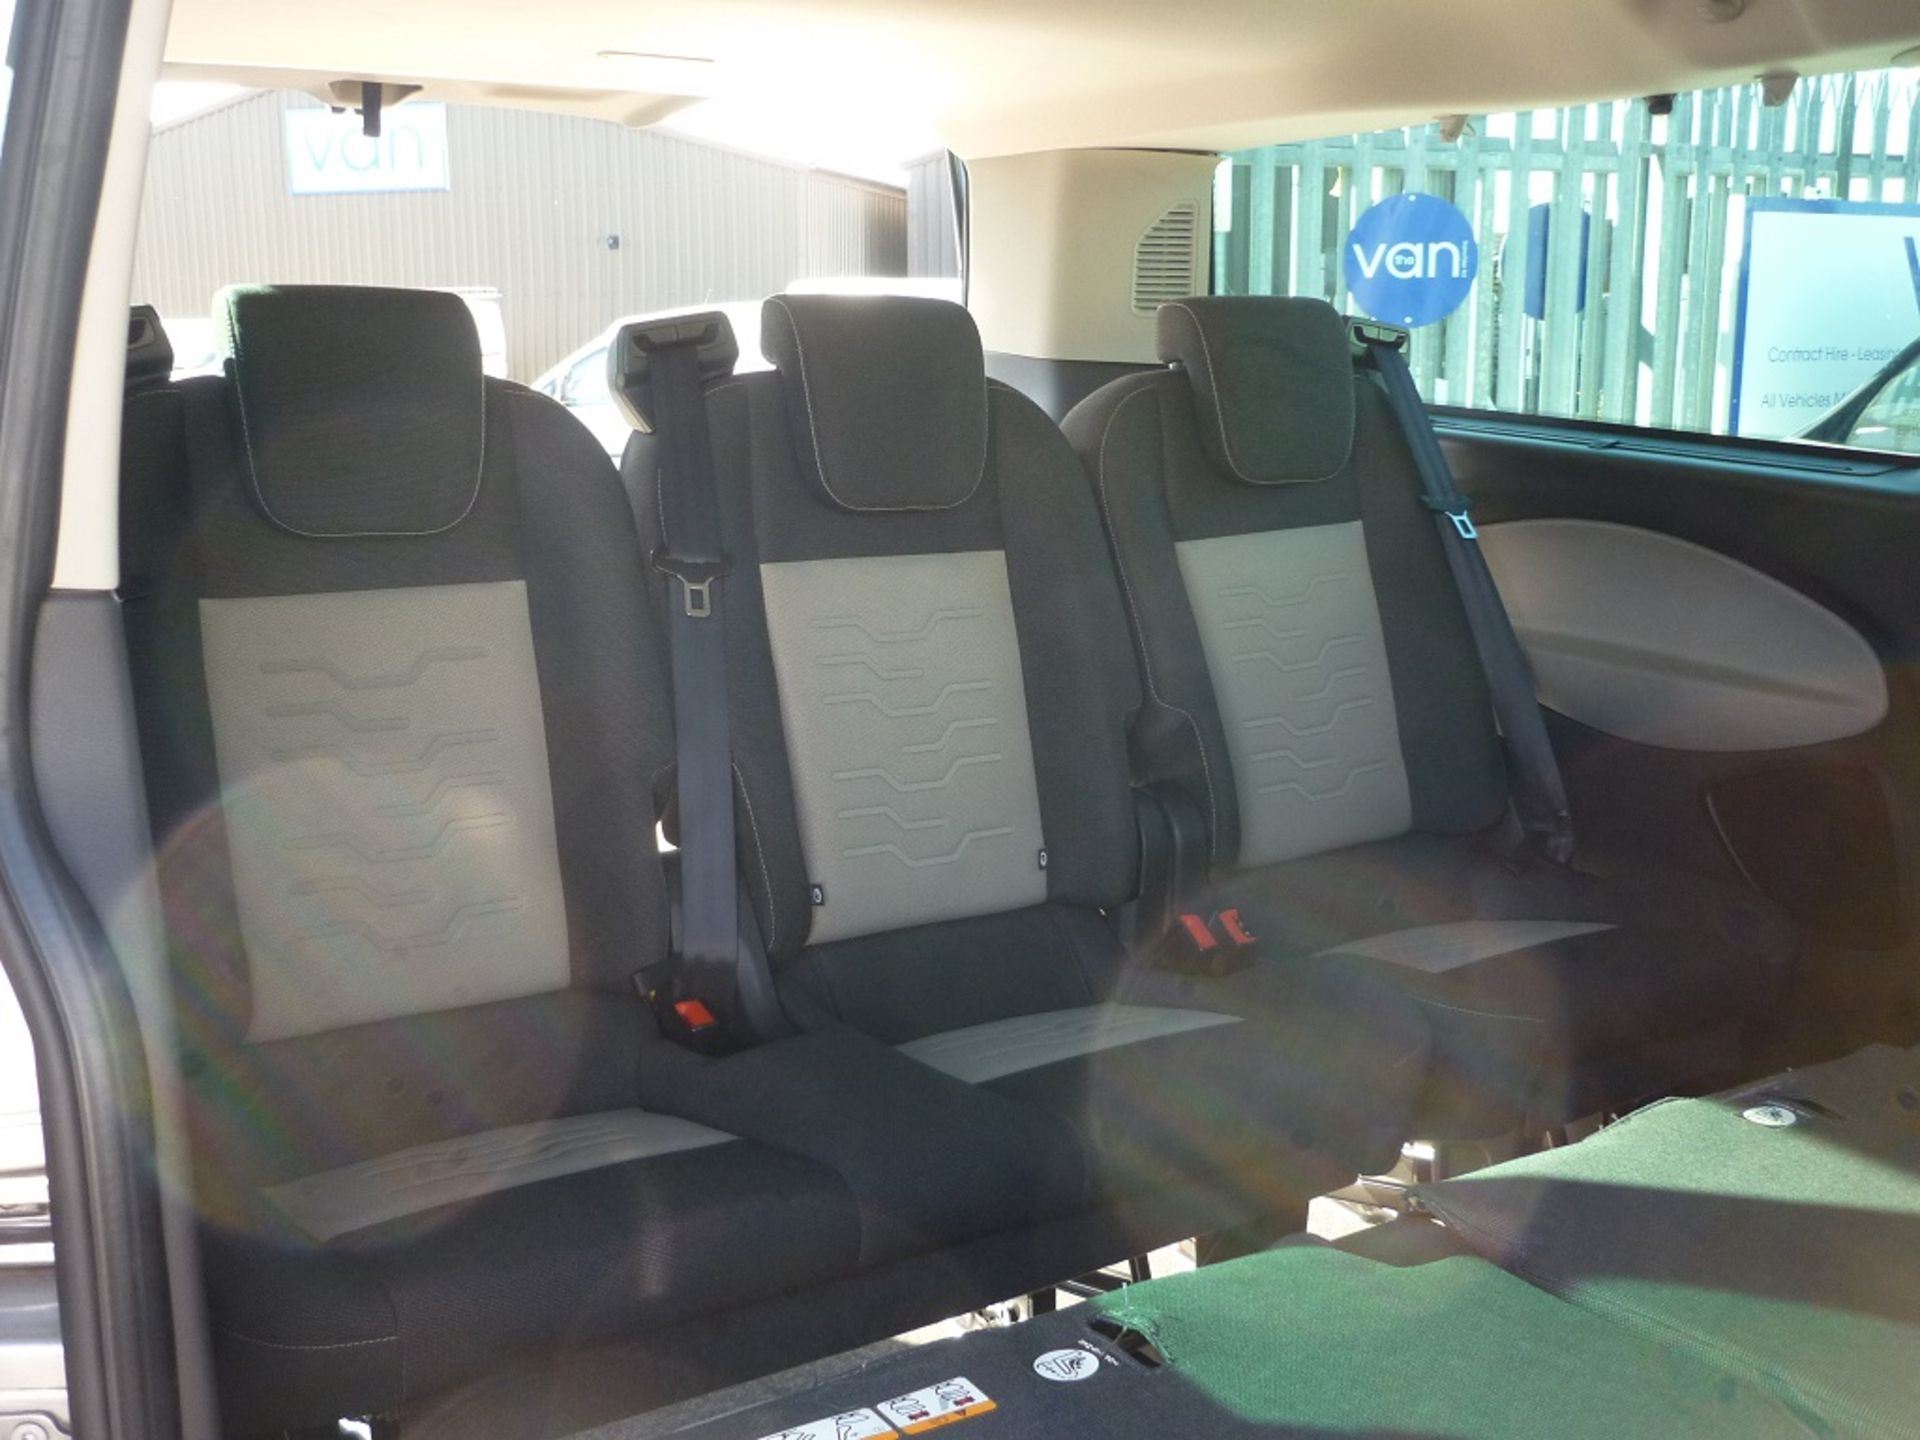 2015/15 REG FORD TOURNEO CUSTOM 300 LIMITED EDITION SILVER DIESEL MPV, SHOWING 0 FORMER KEEPERS - Image 8 of 8